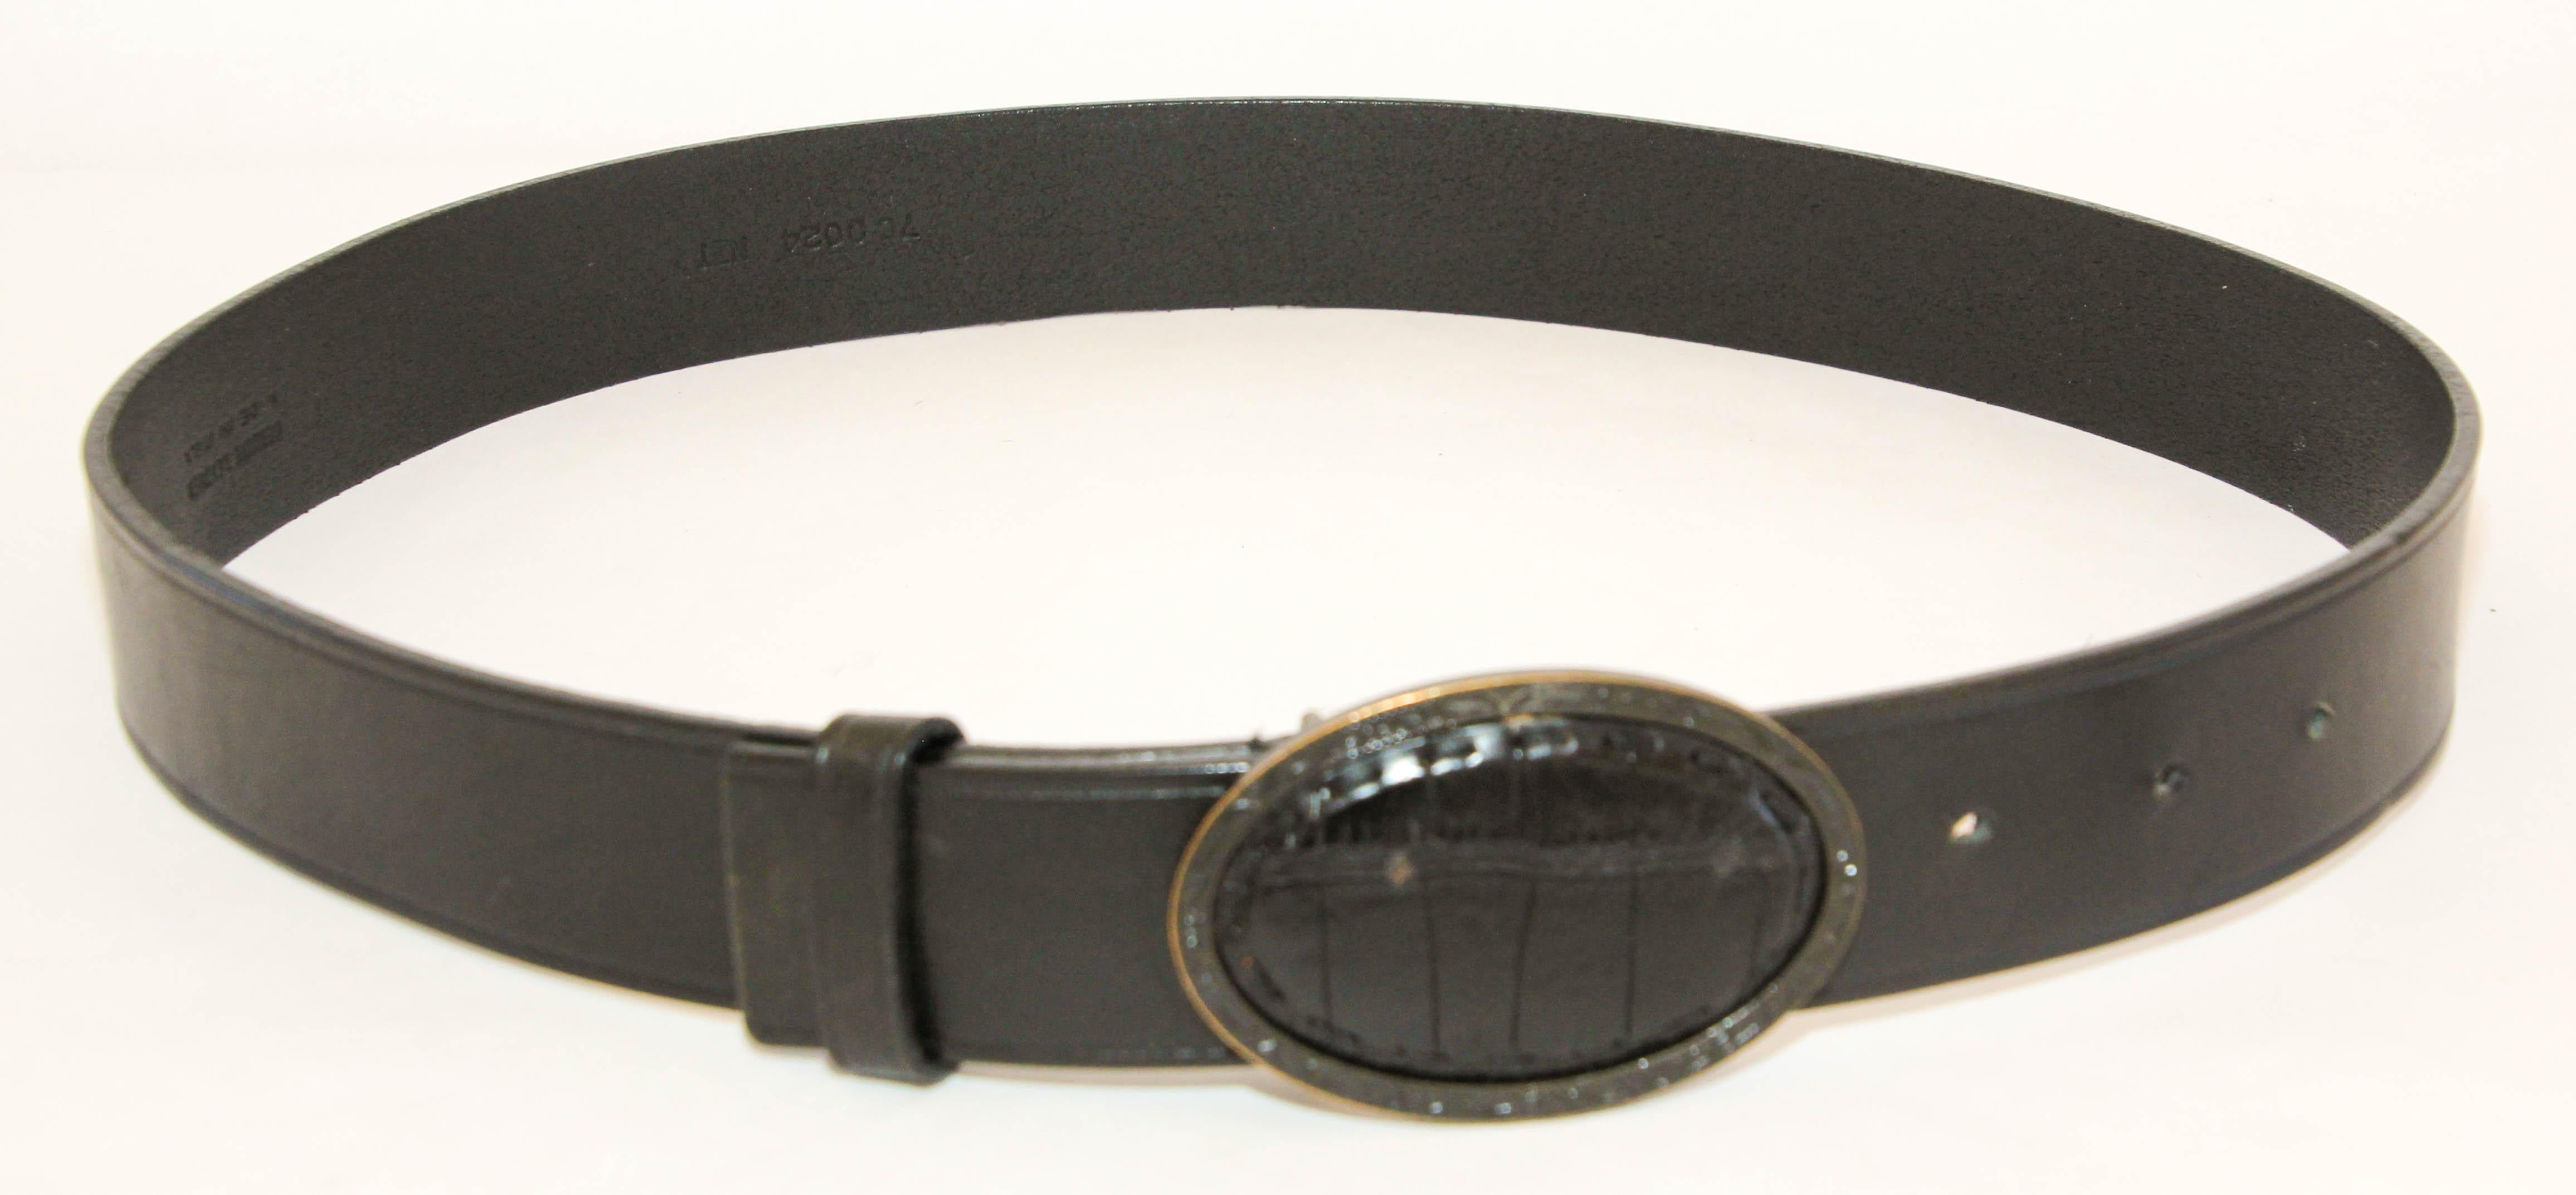 FENDI Black Leather Crocodile Cowboy Belt. In Good Condition For Sale In North Hollywood, CA